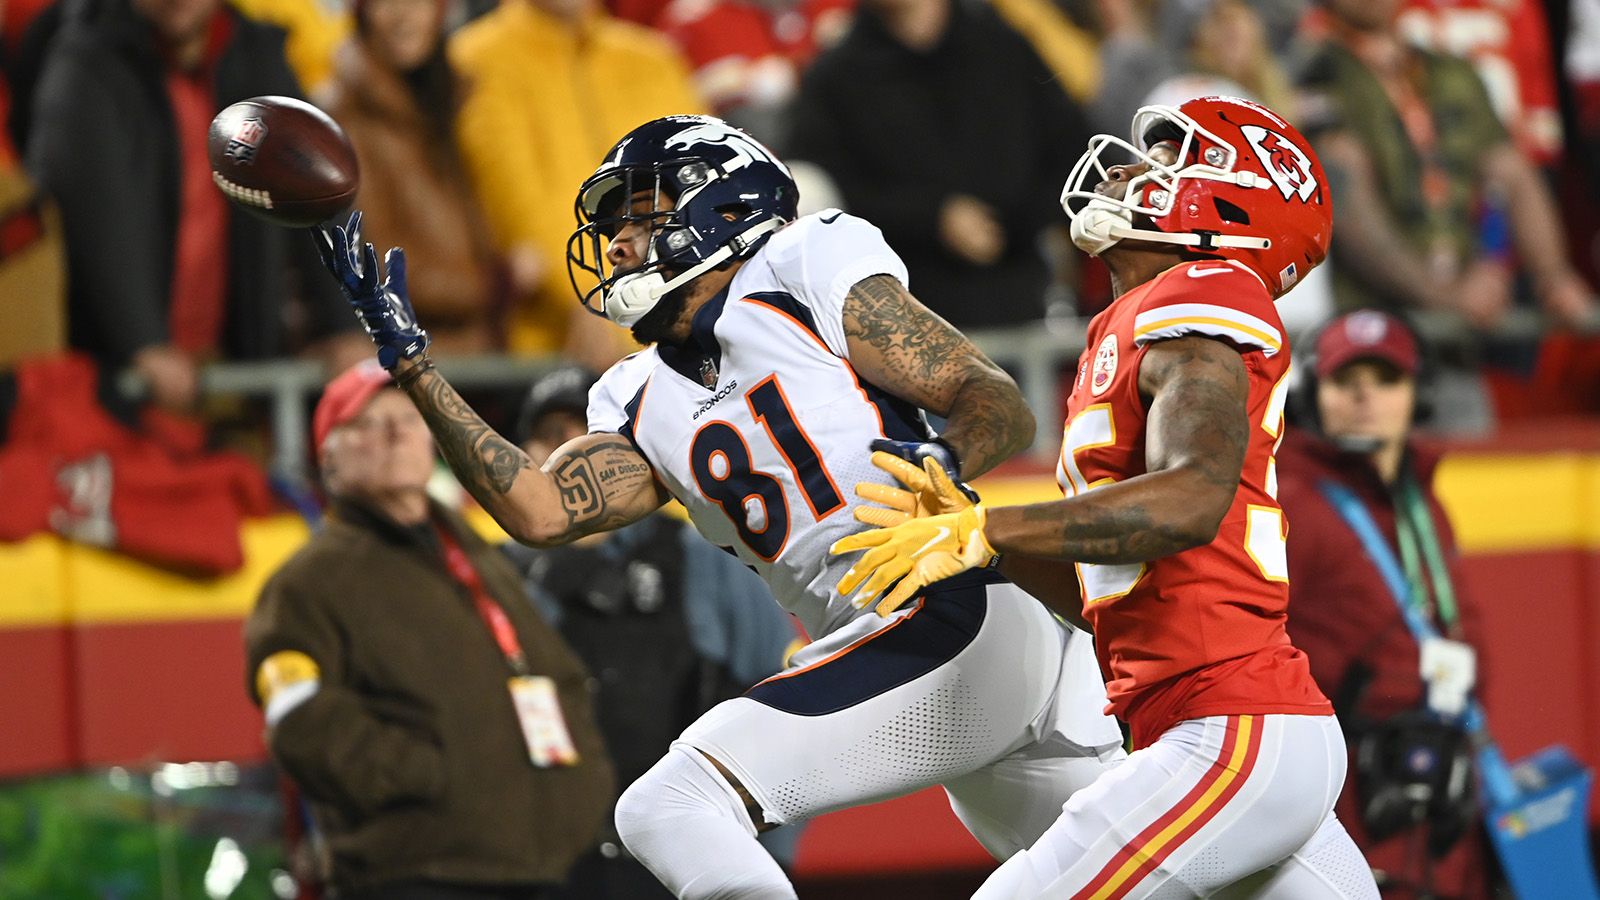 A pass goes off the fingertips of Denver Broncos wide receiver Tim Patrick at Arrowhead Stadium on Dec. 5, 2021.